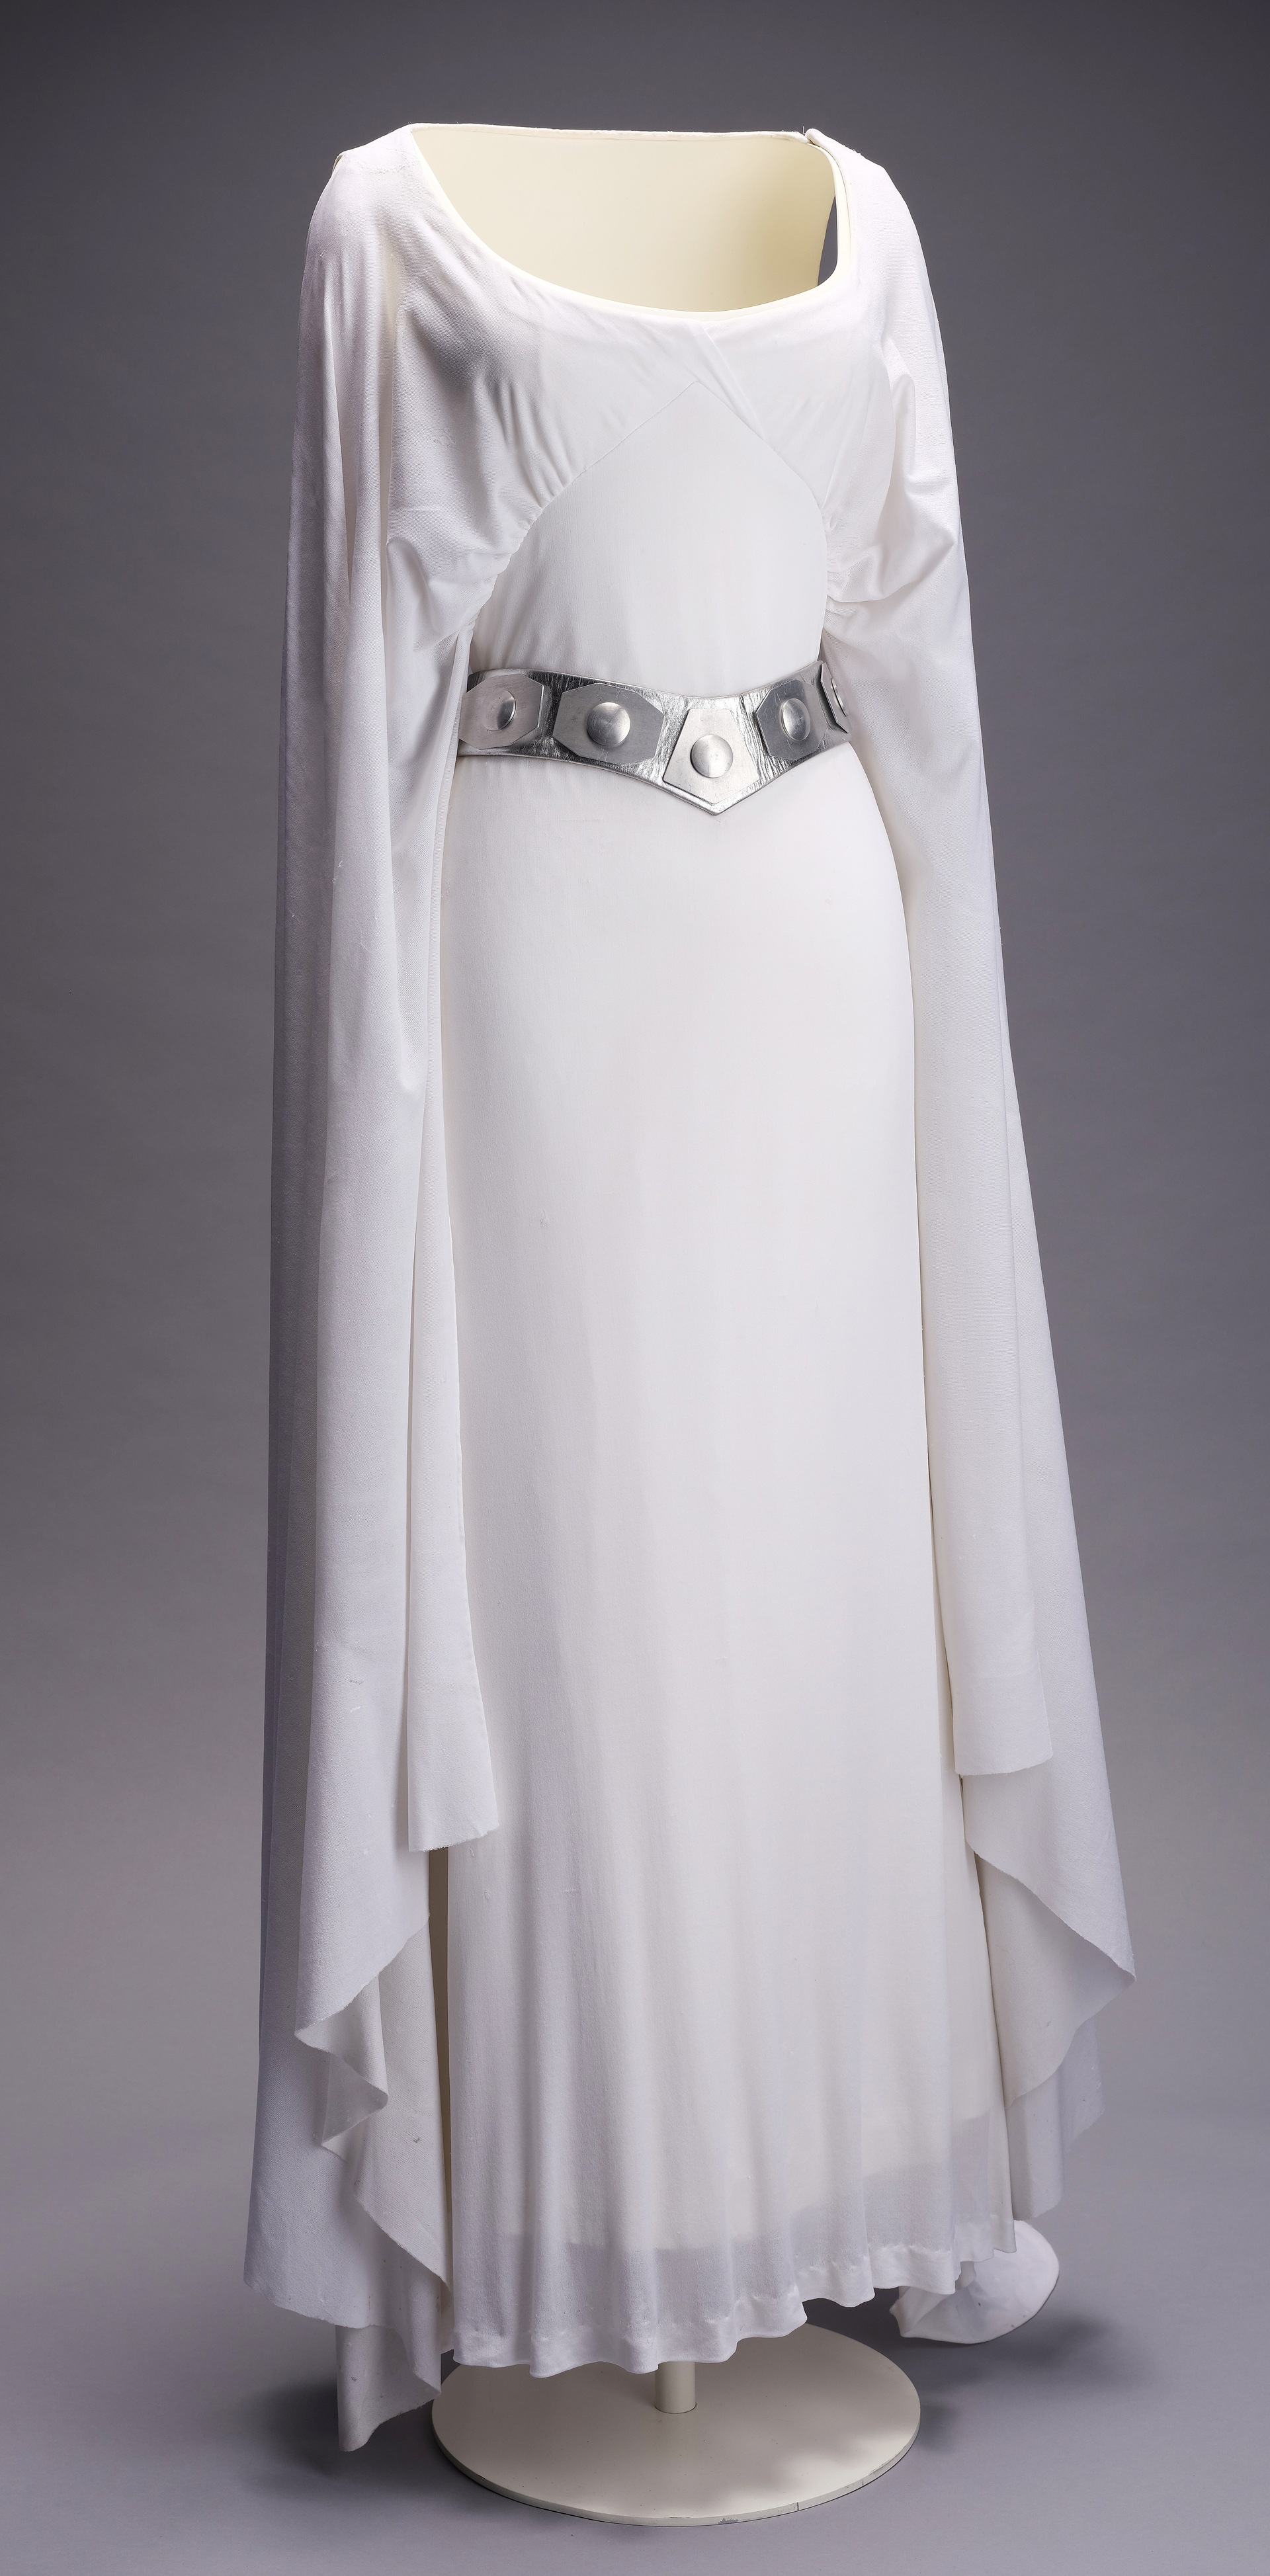 STAR WARS: A NEW HOPE (1977) - Princess Leia's (Carrie Fisher) Screen-Matched Ceremonial Dress - Image 2 of 39